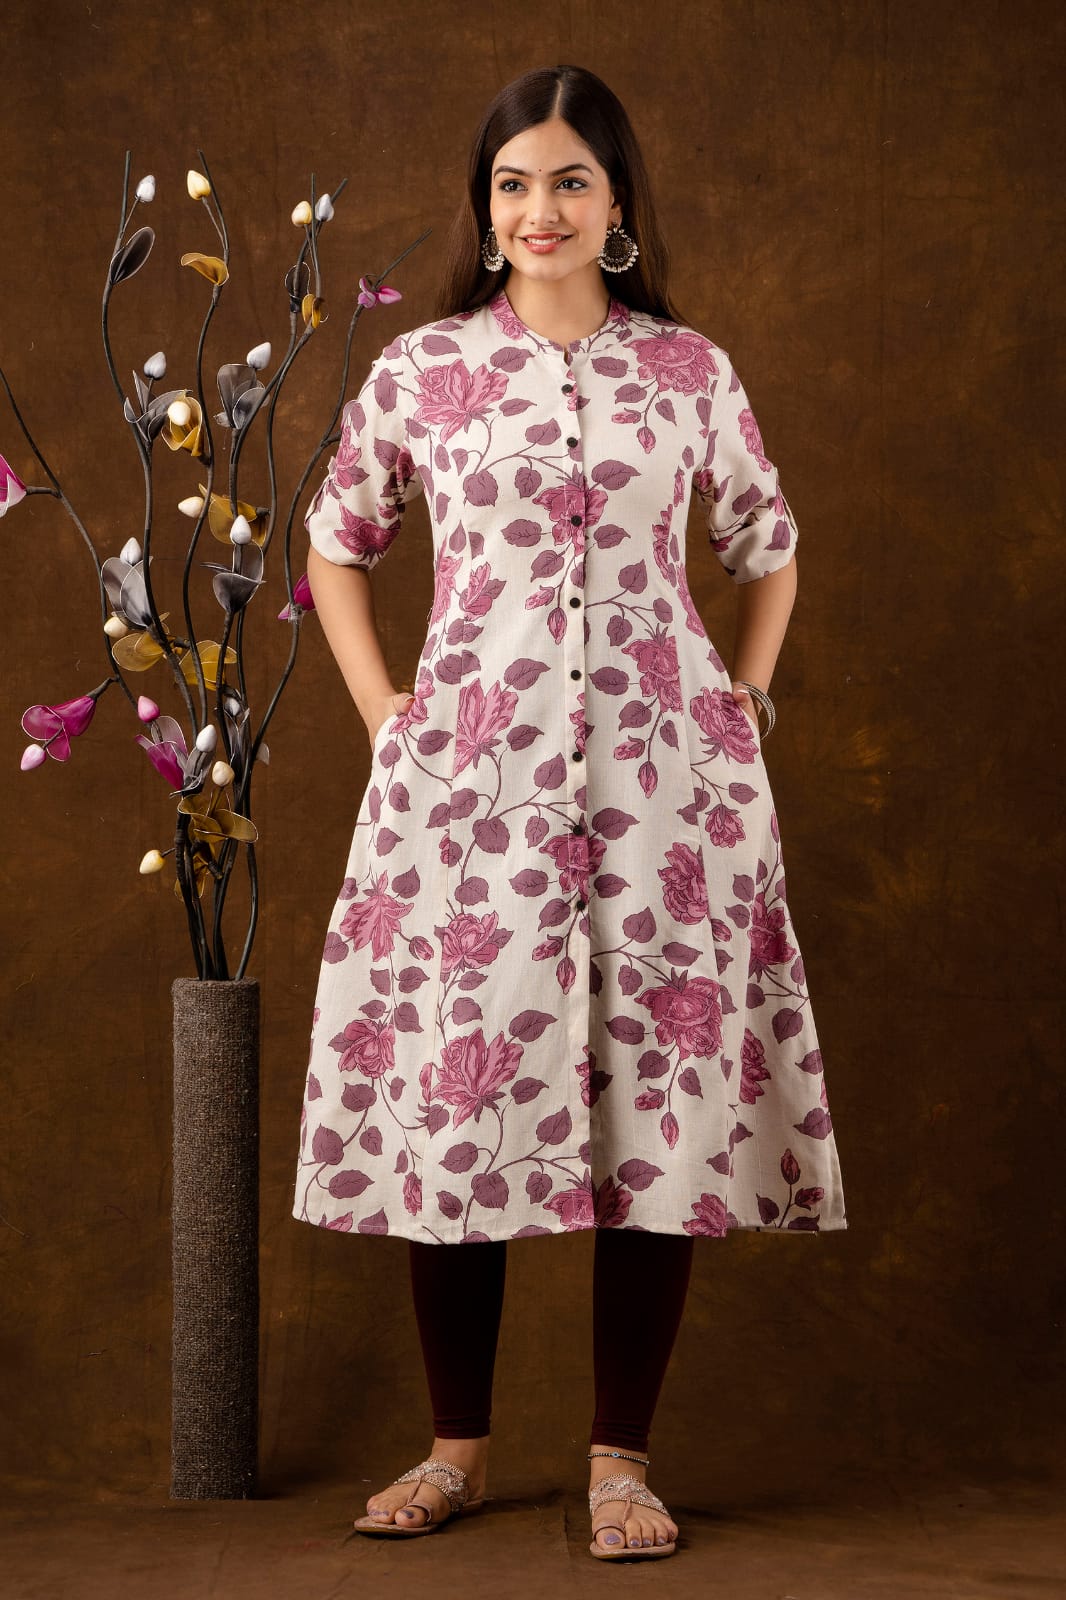 20 Modern A-line Kurti Designs for Women with Trendy Look